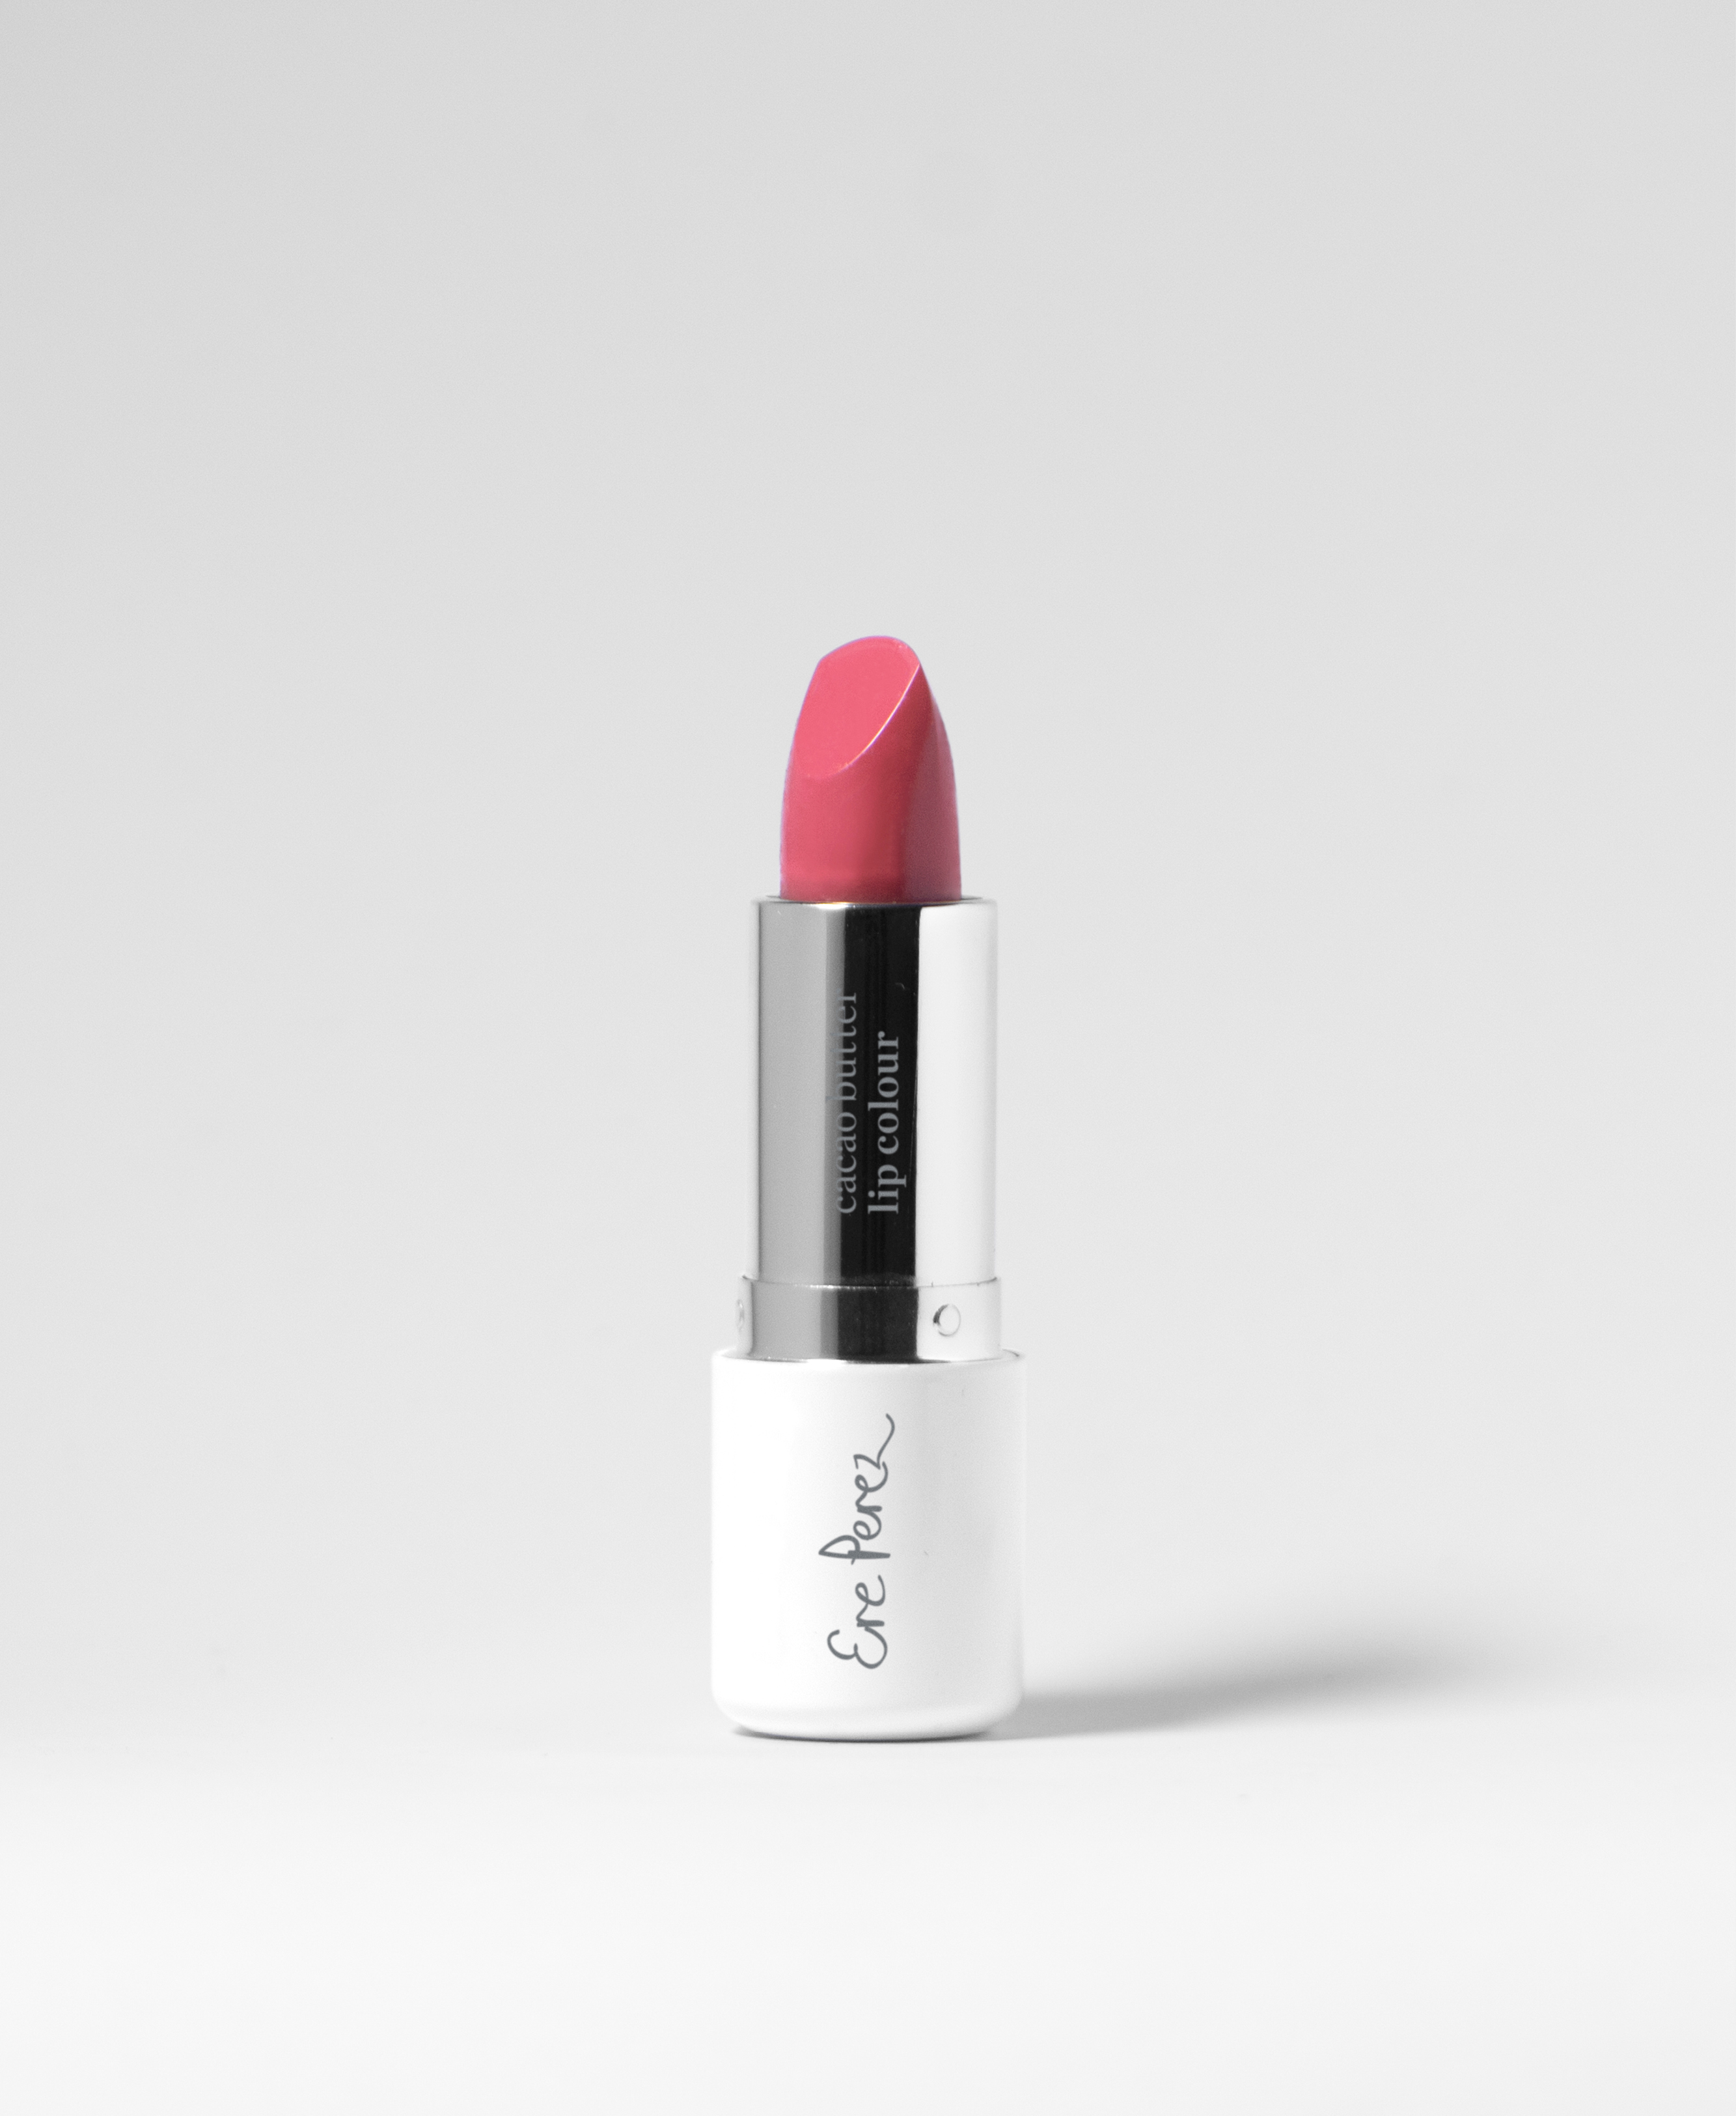 Cacao Lip Colour - Play your daily shades guava pink